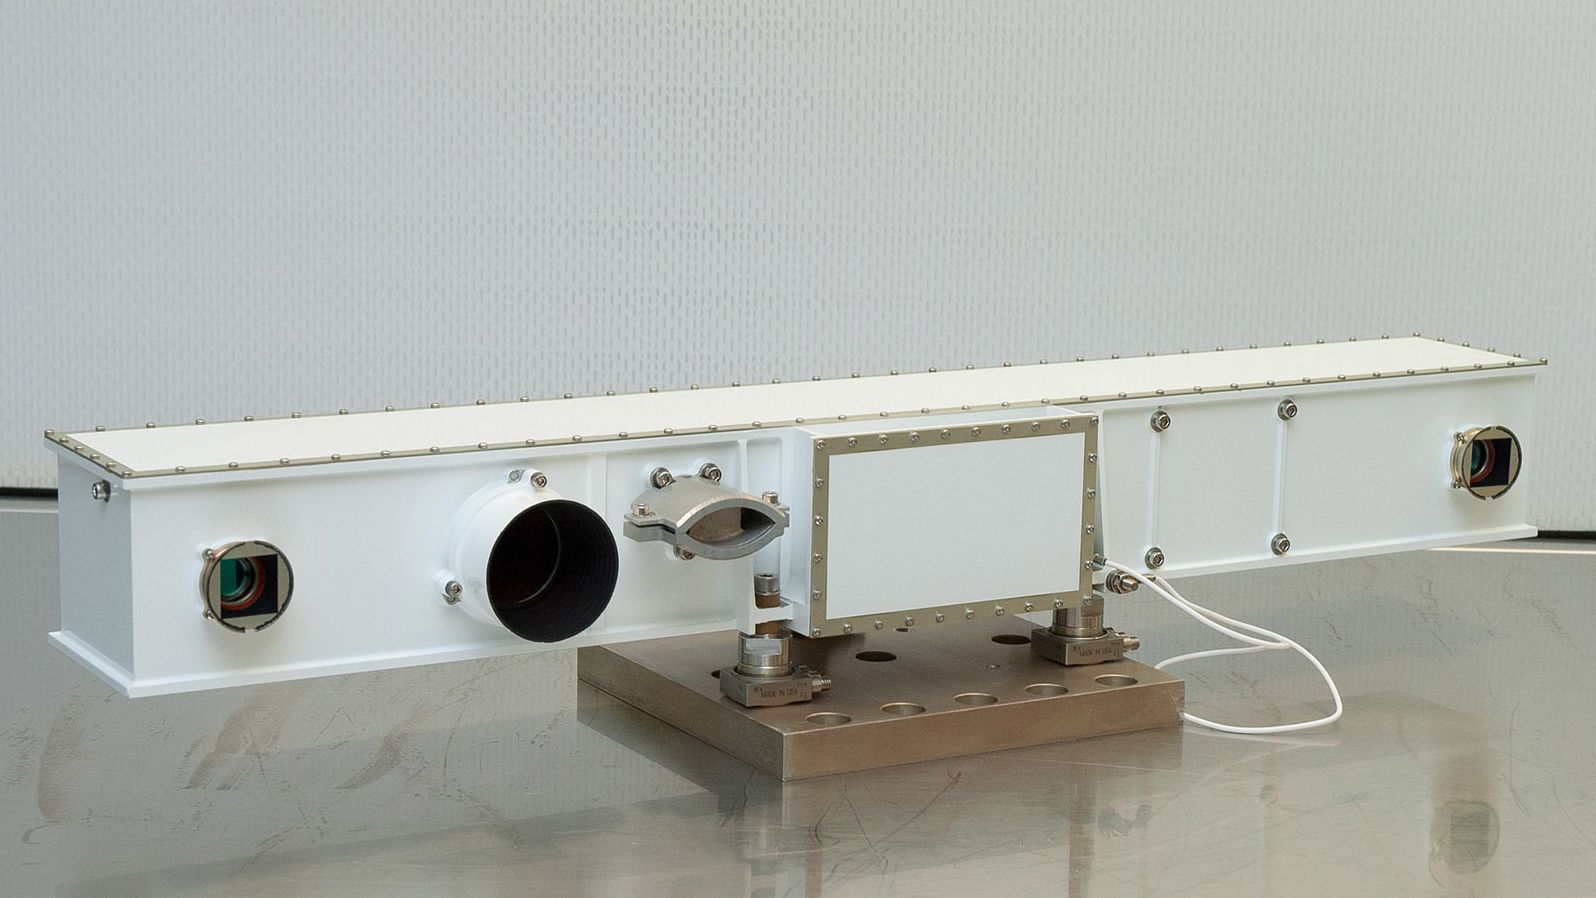 The PanCam. The camera system that could help discover life on Mars.